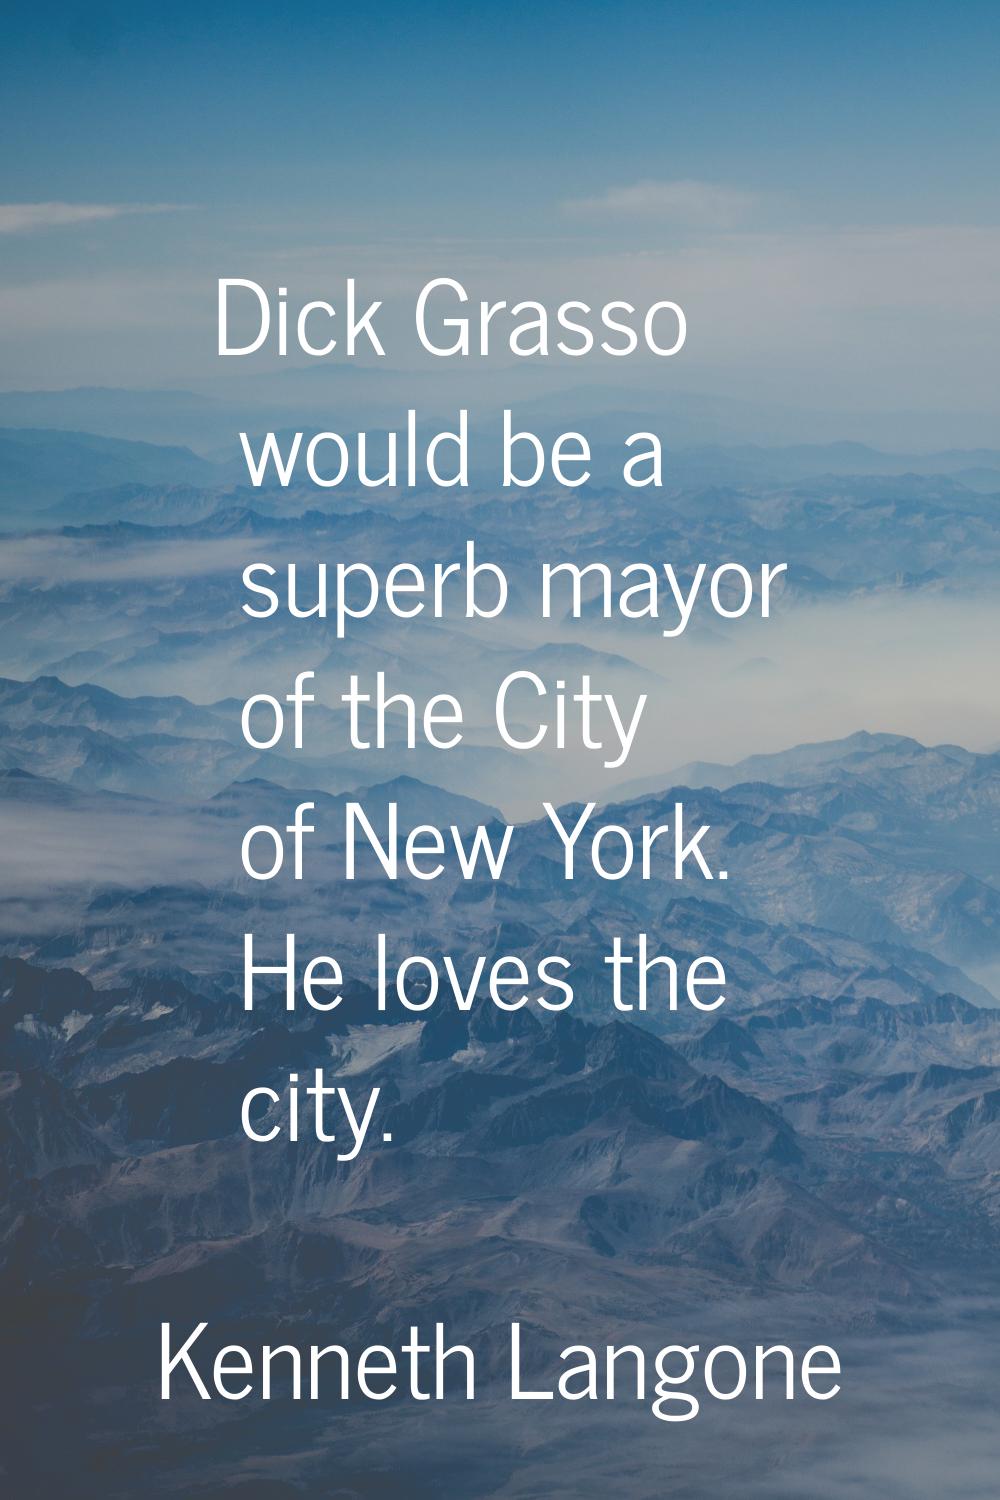 Dick Grasso would be a superb mayor of the City of New York. He loves the city.